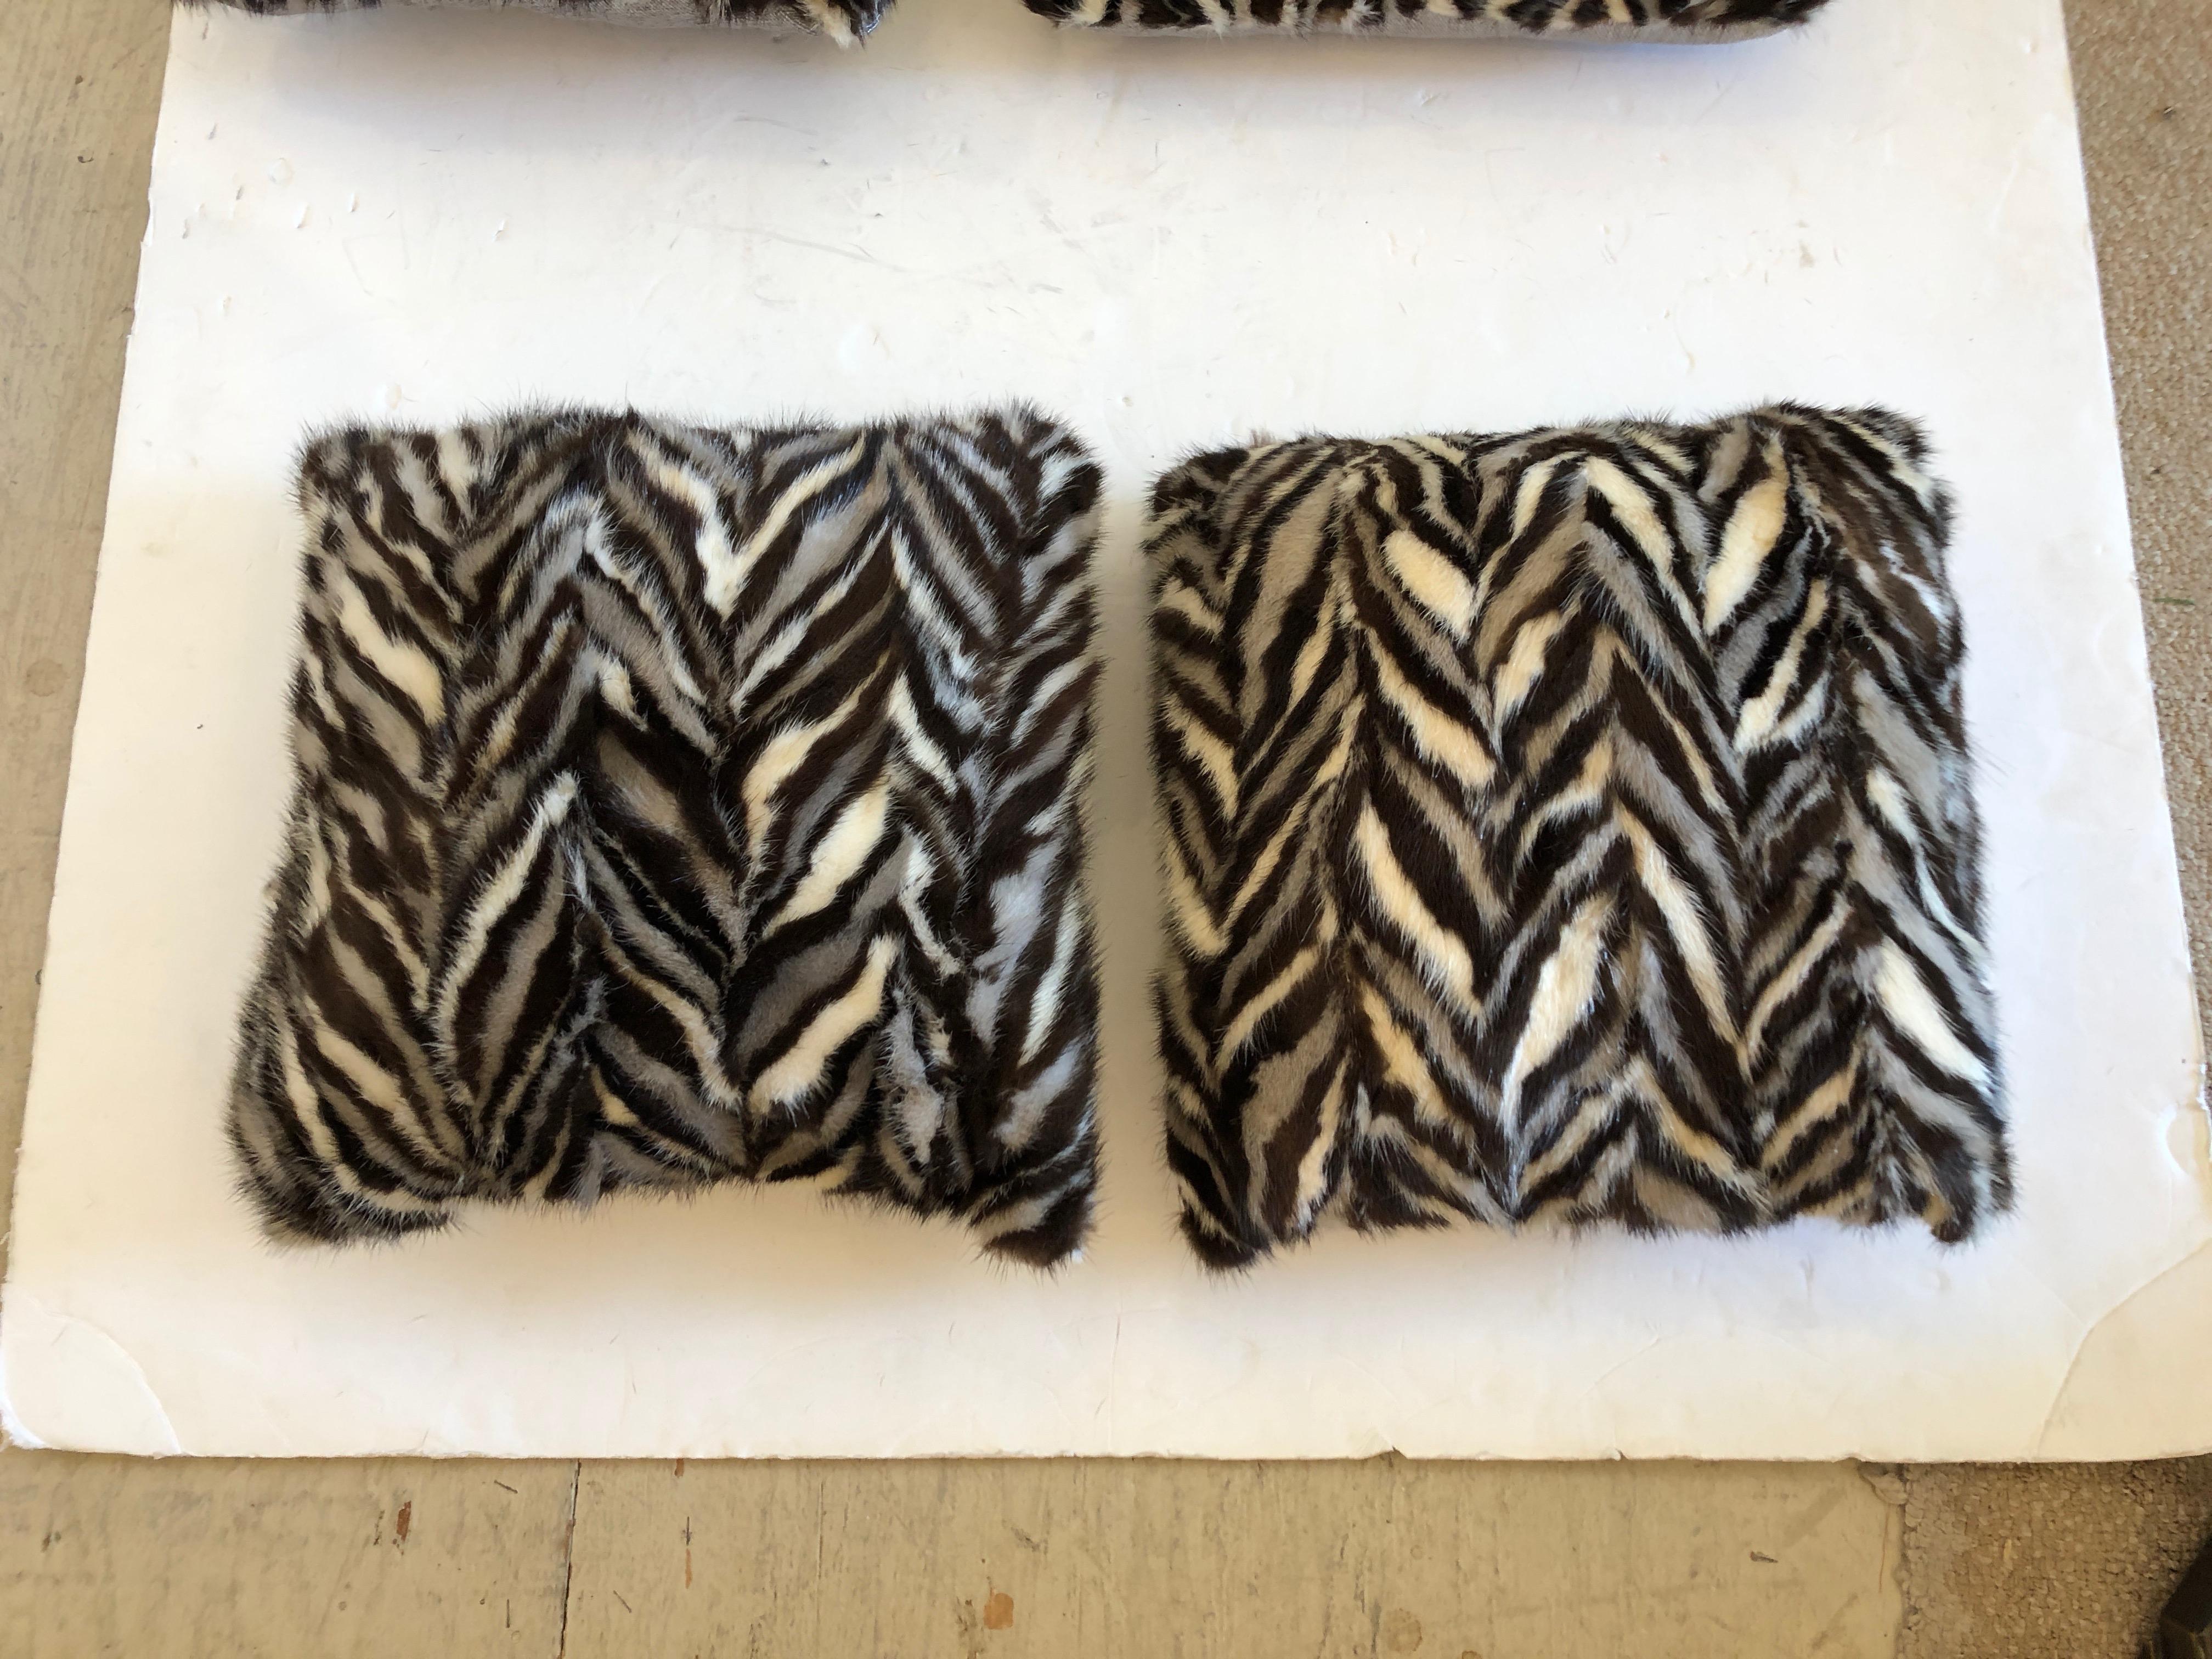 A collection of one of a kind mink pillows having a graphic black, white and grey zig zaggy pattern with platinum colored linen backs. One pair slightly smaller than the other pair.
Smaller set are 13 inches square; larger 14 inches square
Note: